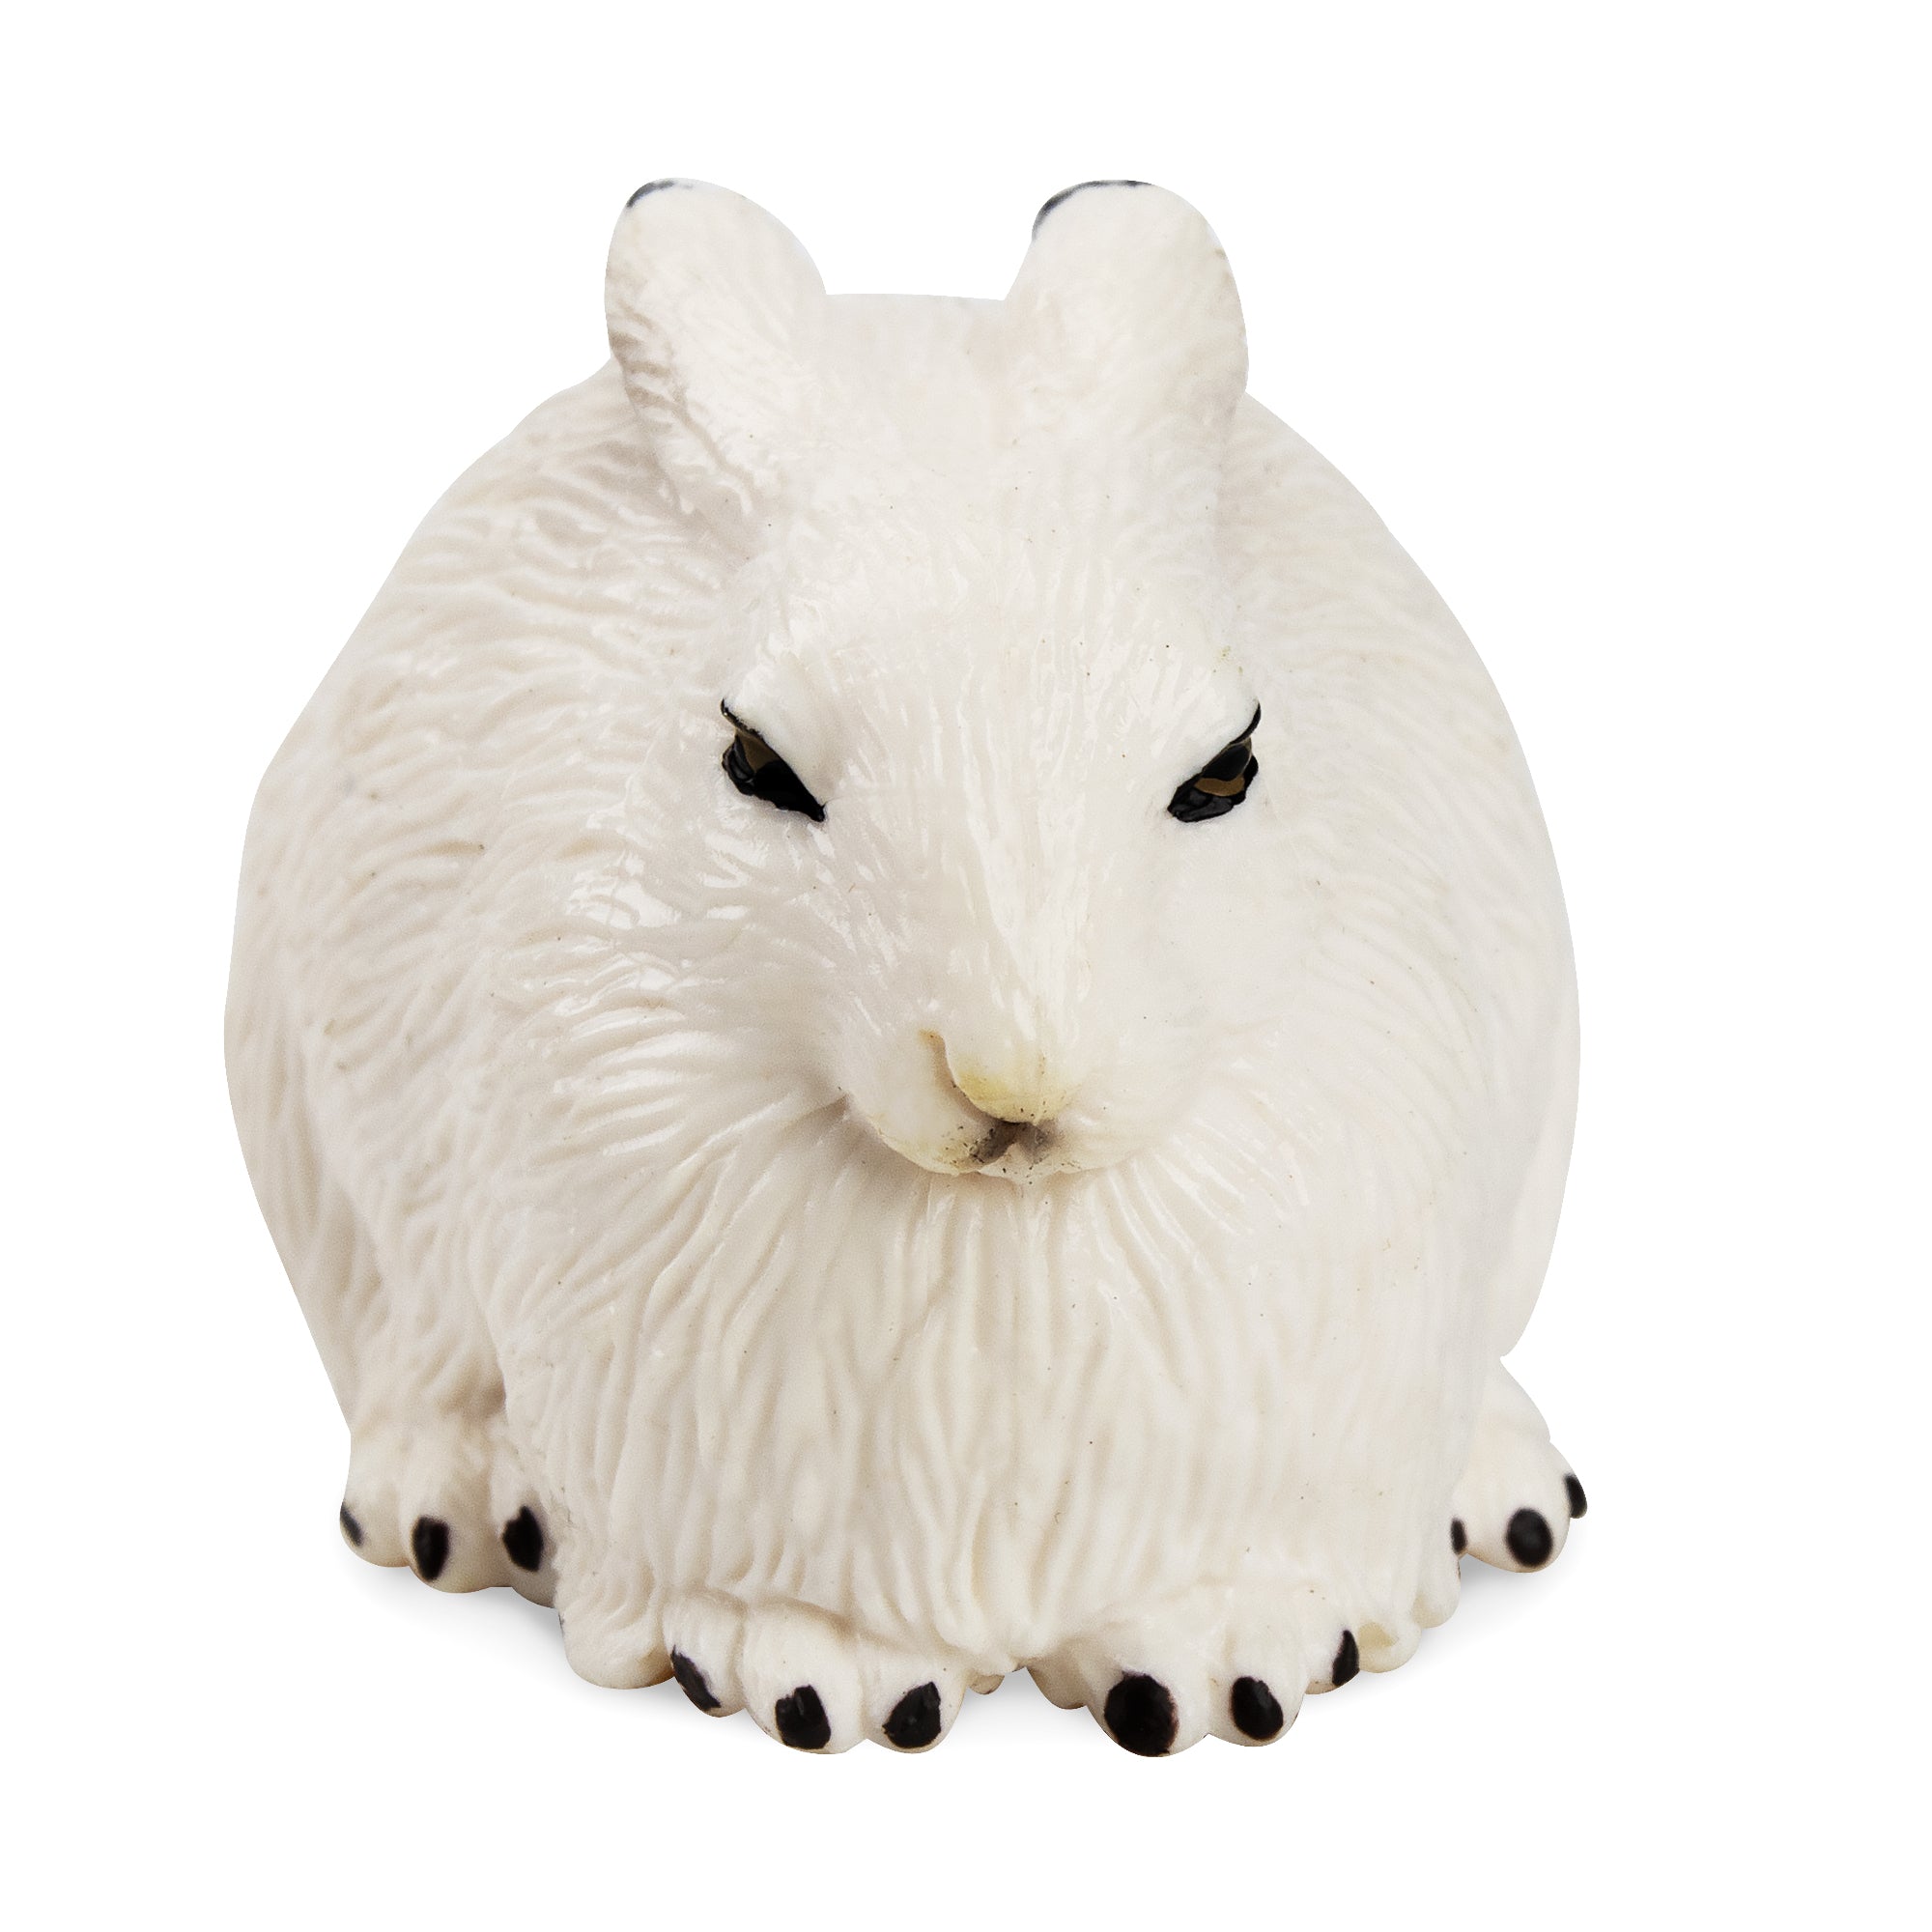 Arctic Hare Figurine Toy-front